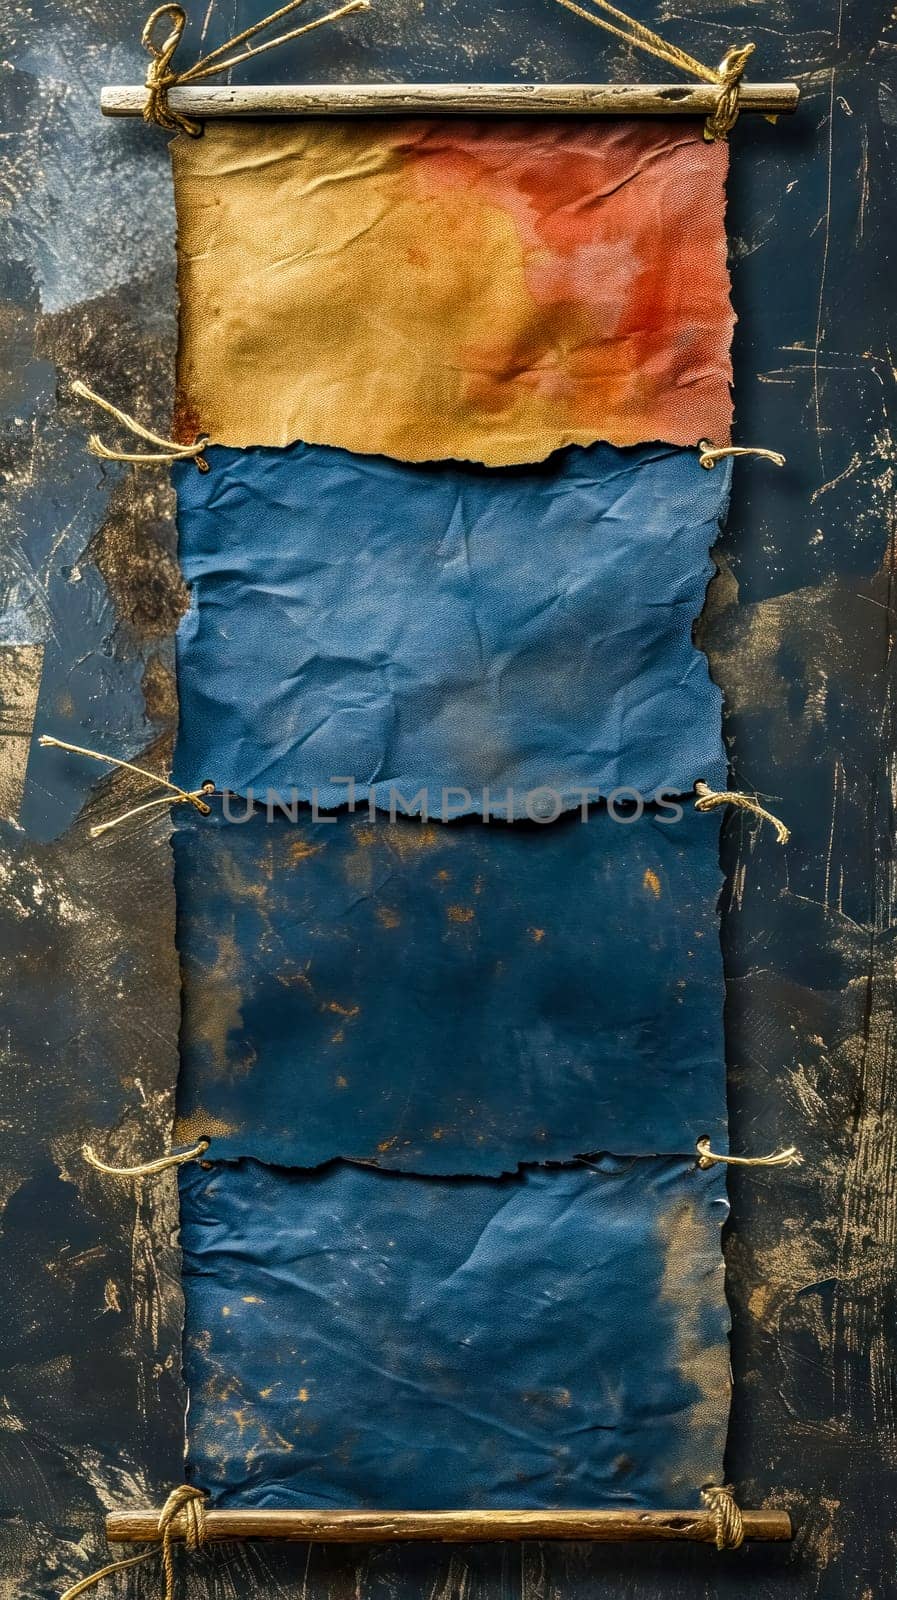 Three vertical hanging banners with frayed edges, in gradient colors from gold to red to blue, suspended by ropes on a weathered stick against a grungy dark blue background. by Edophoto